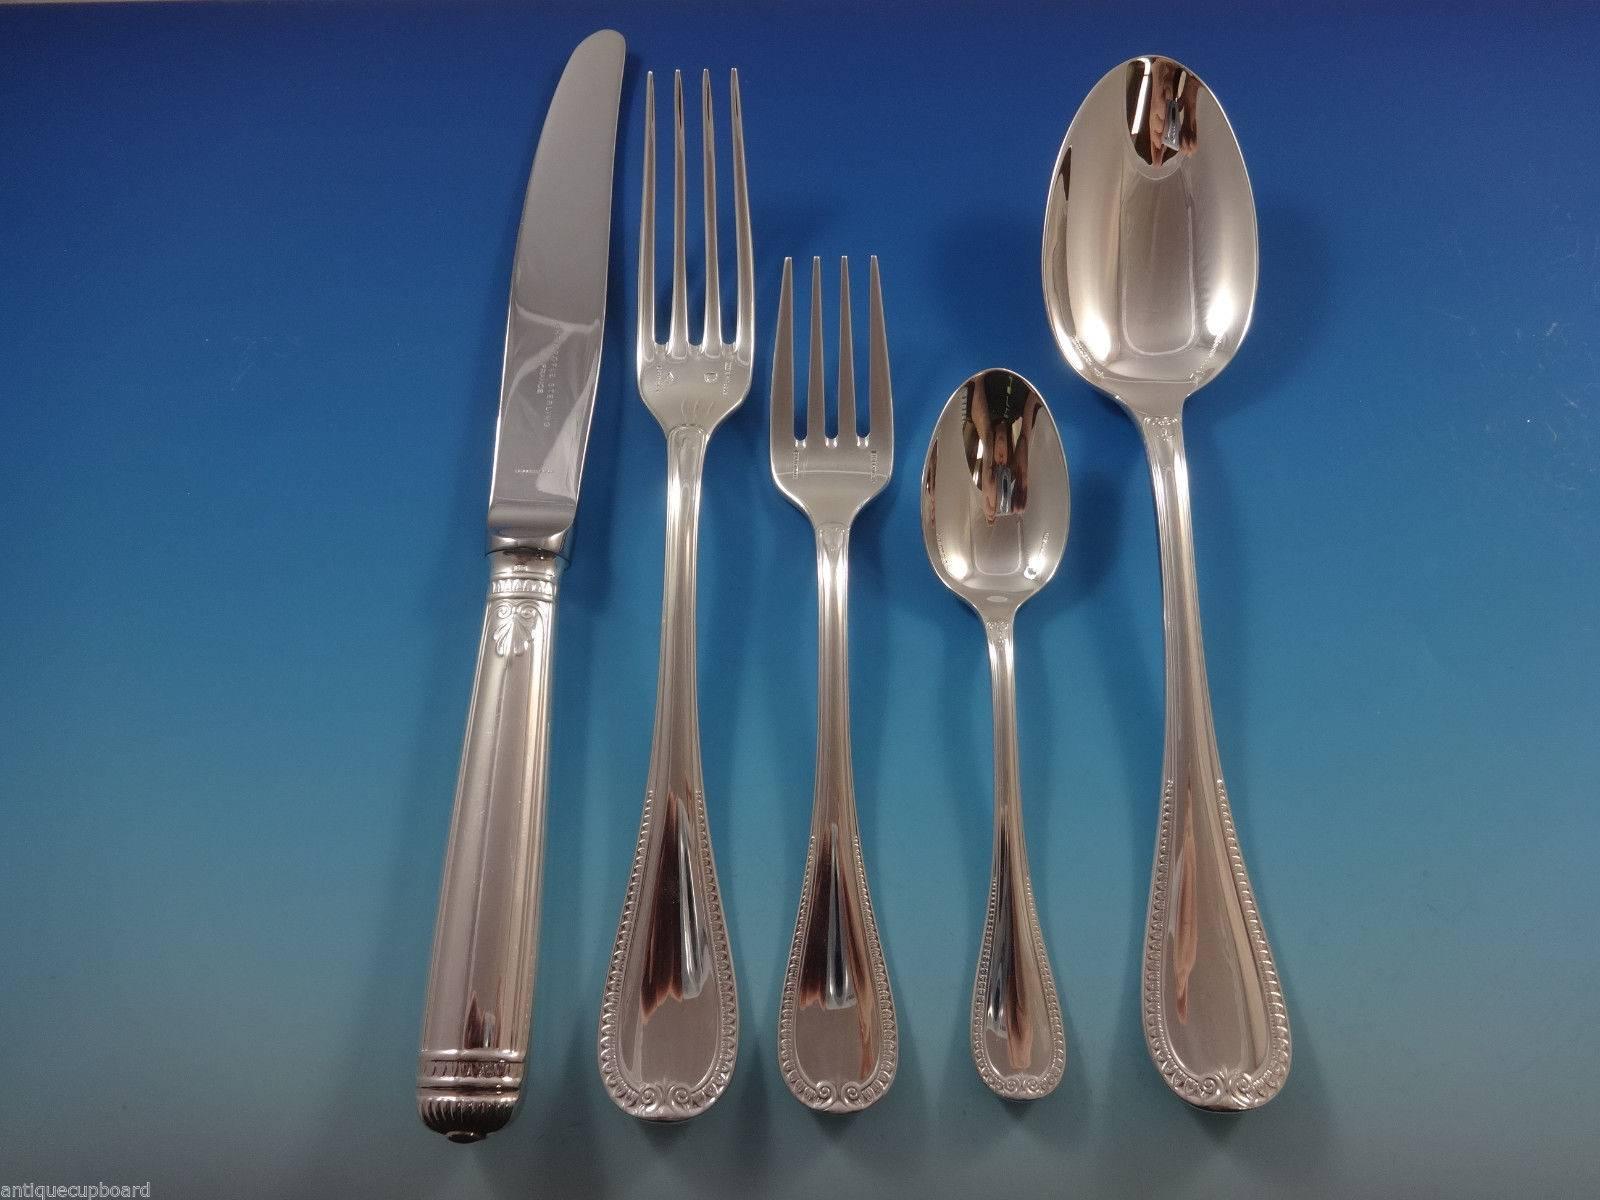 With a dedication to perfection and quality, Christofle flatware creations unite craftsmanship and modern technique, resulting in flatware to be handed down through generations. The border of palmettes and the lotus leaf on the spatula of Malmaison